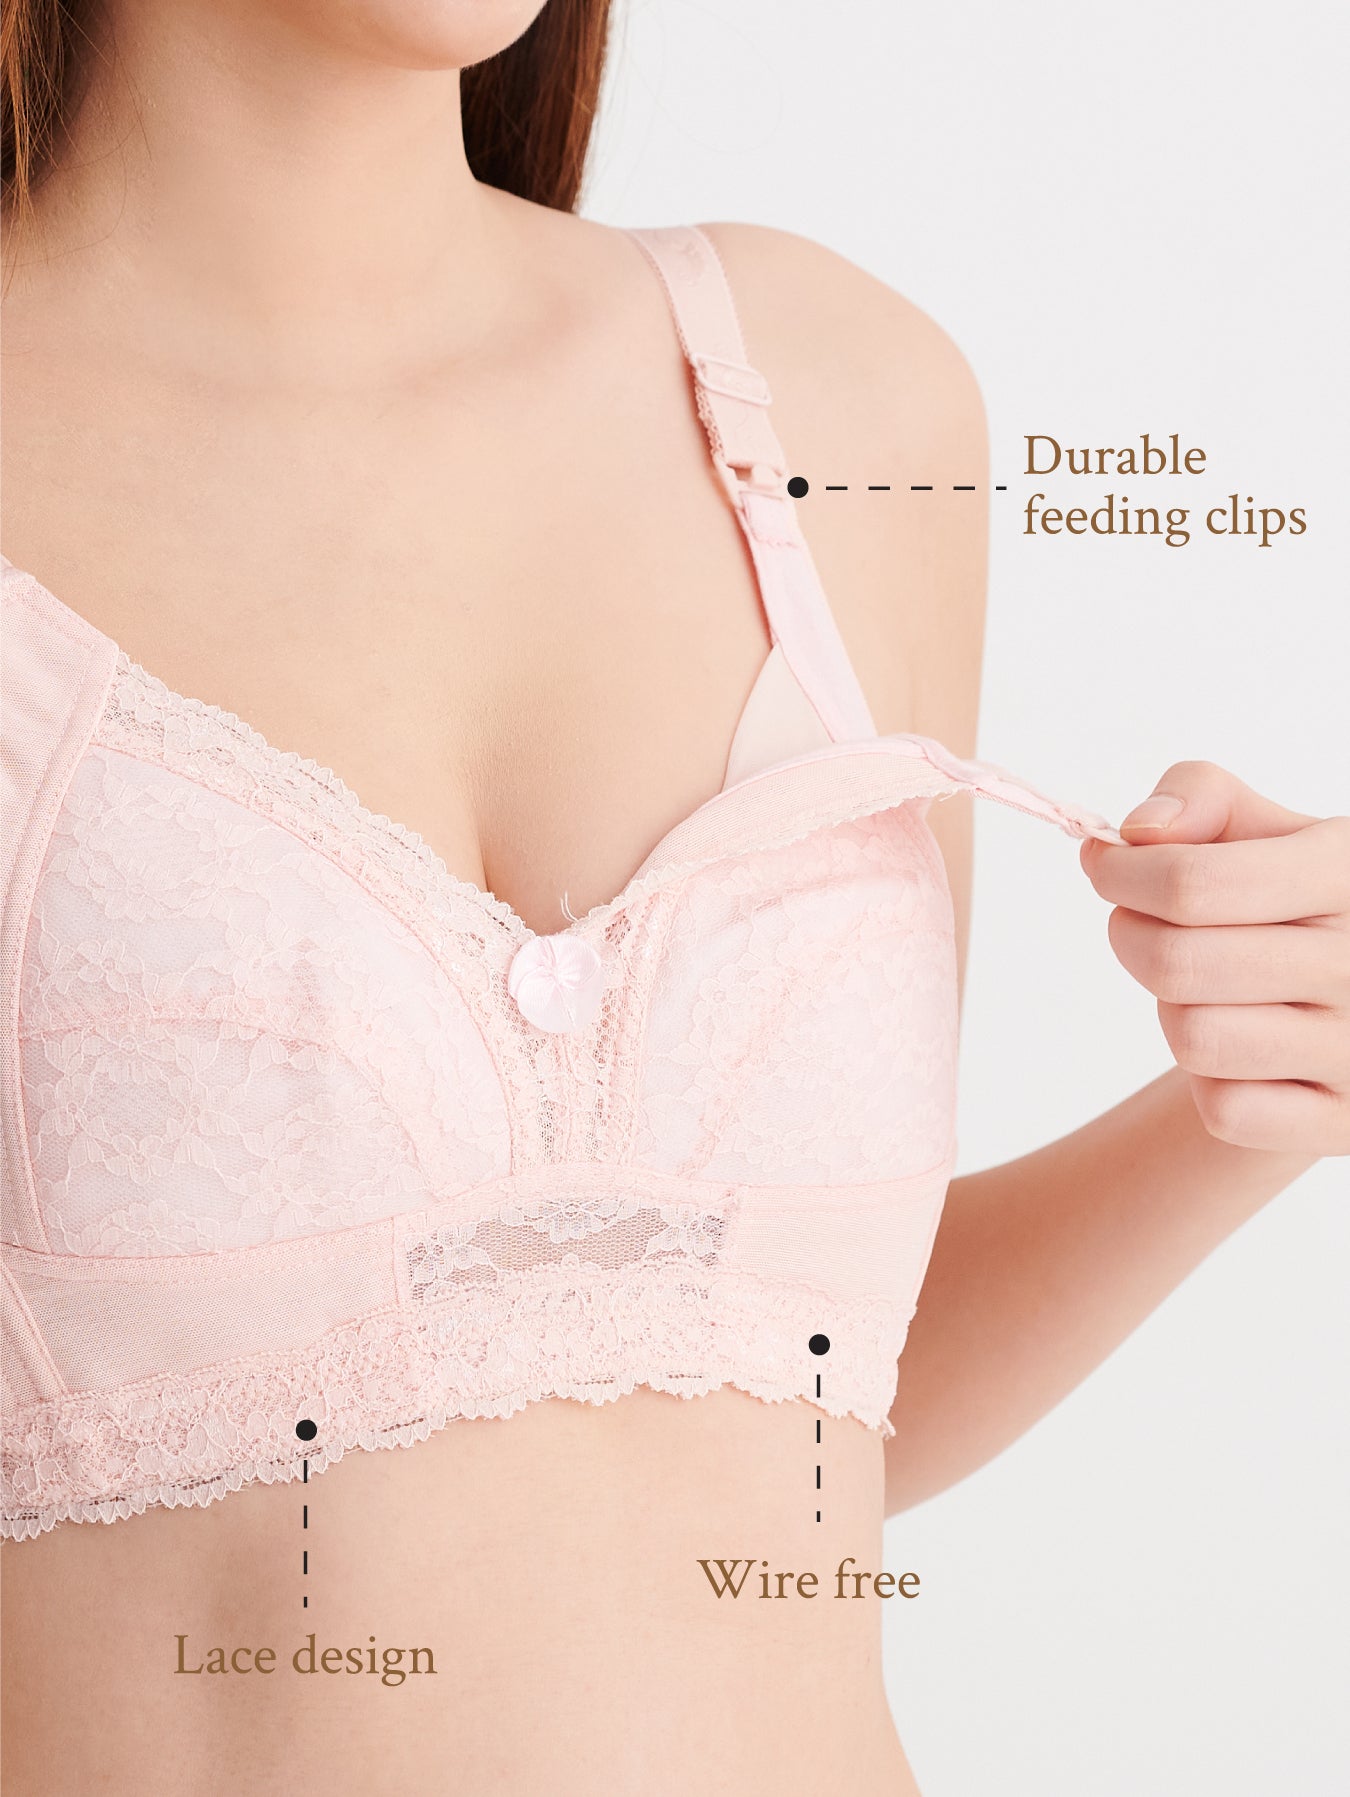 Soft and supportive nursing bra with premium design